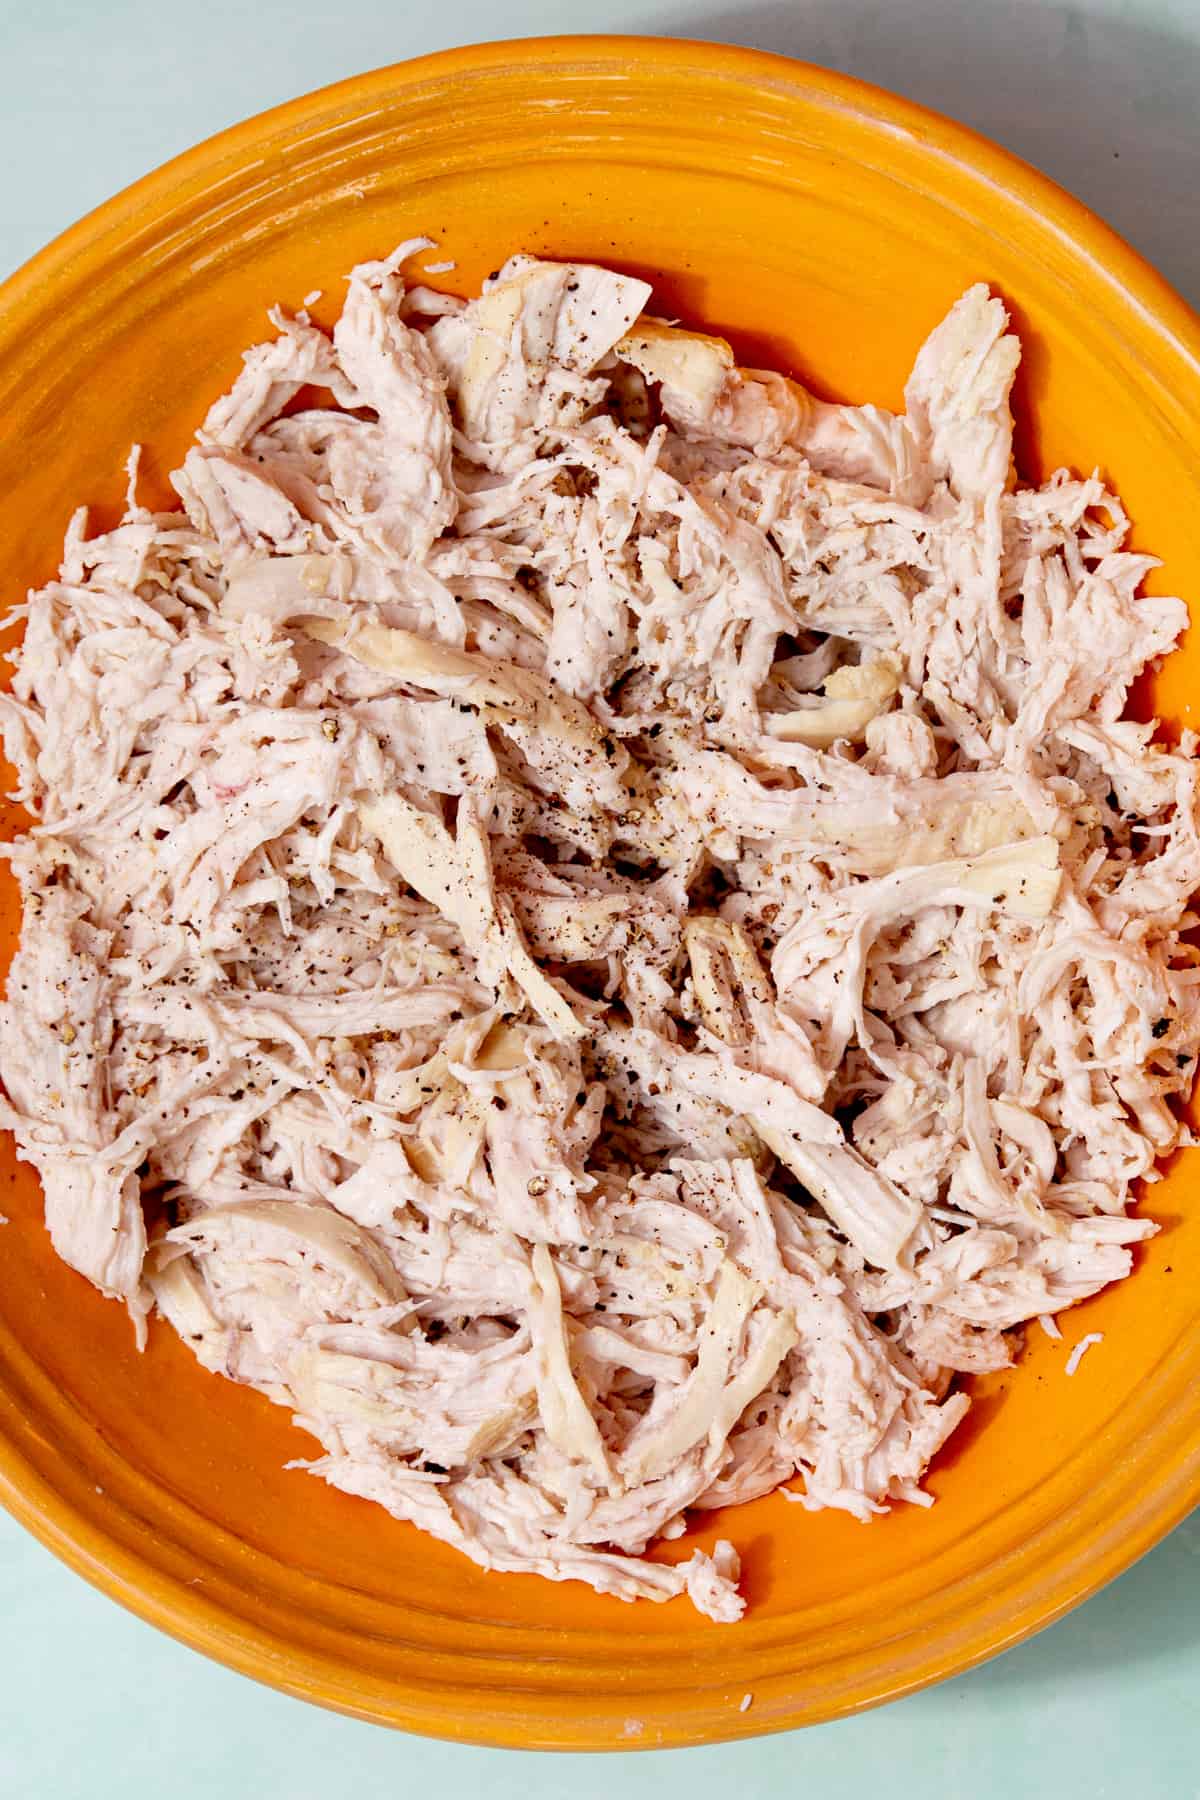 A yellowish plate with lots of seasoned shredded chicken.